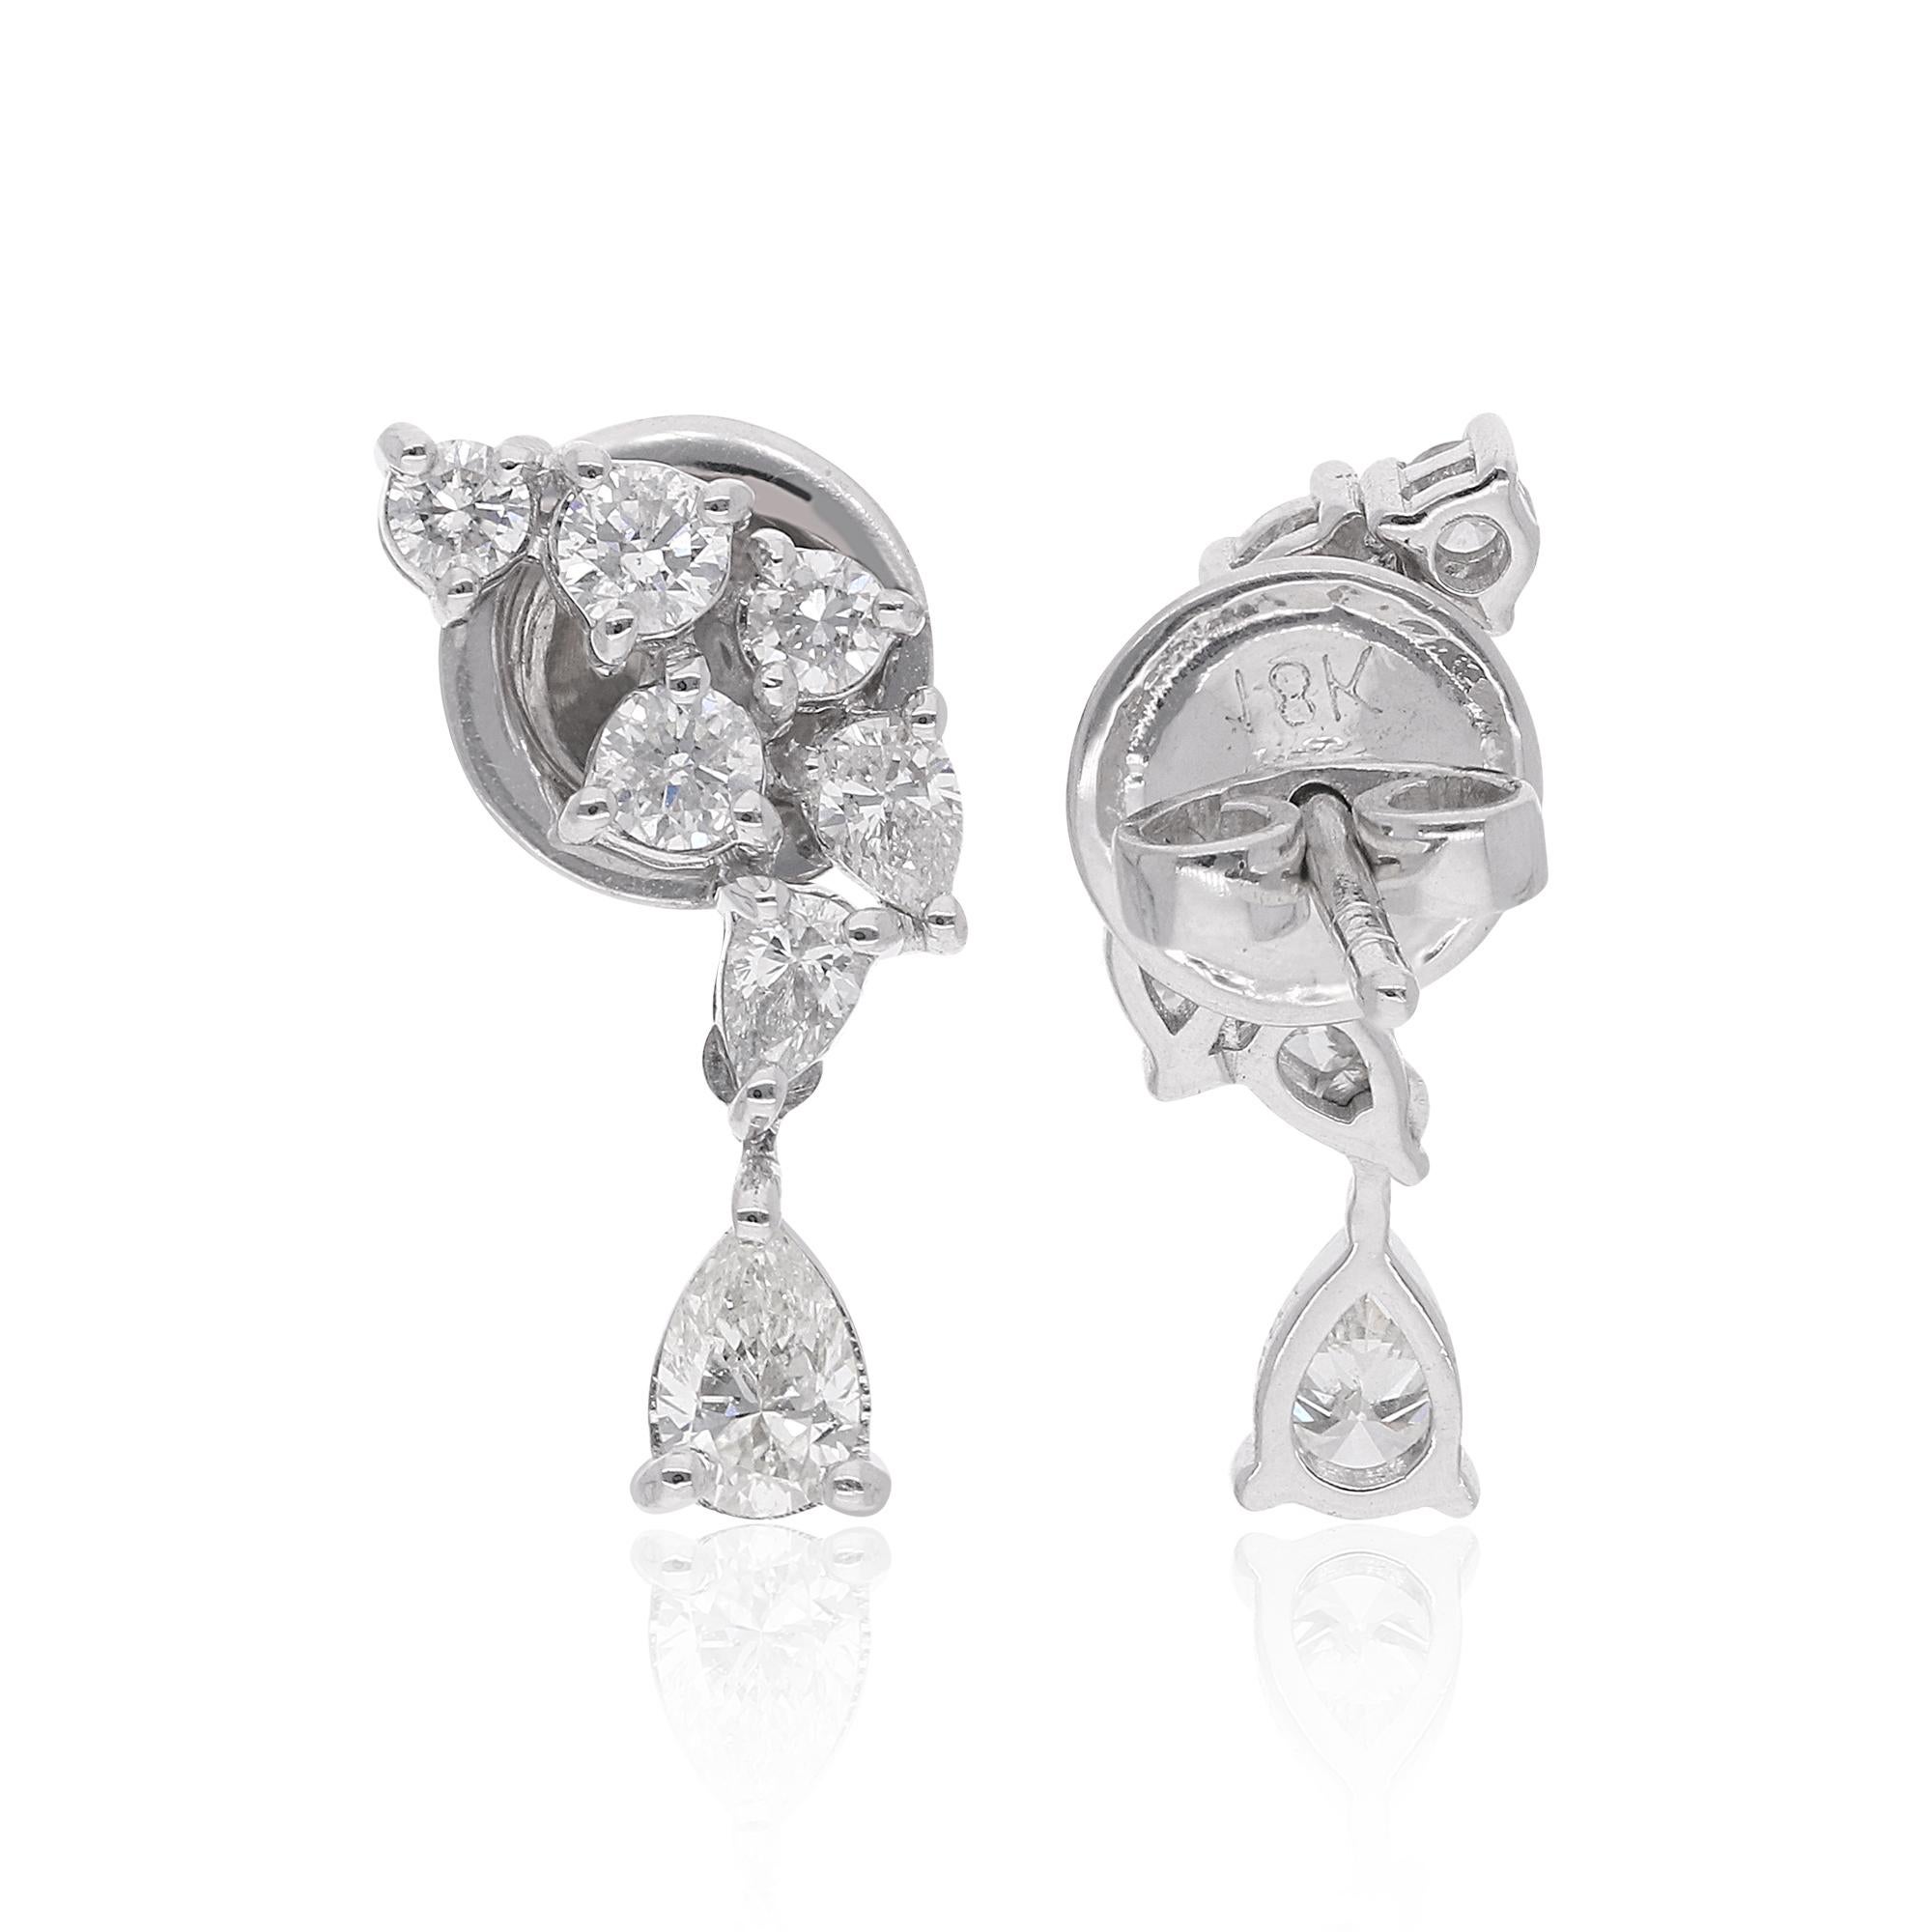 Crafted with precision and attention to detail, these pear and round diamond dangle earrings are a true testament to fine craftsmanship and timeless style. Treat yourself or someone special to the unmatched beauty and sophistication of these